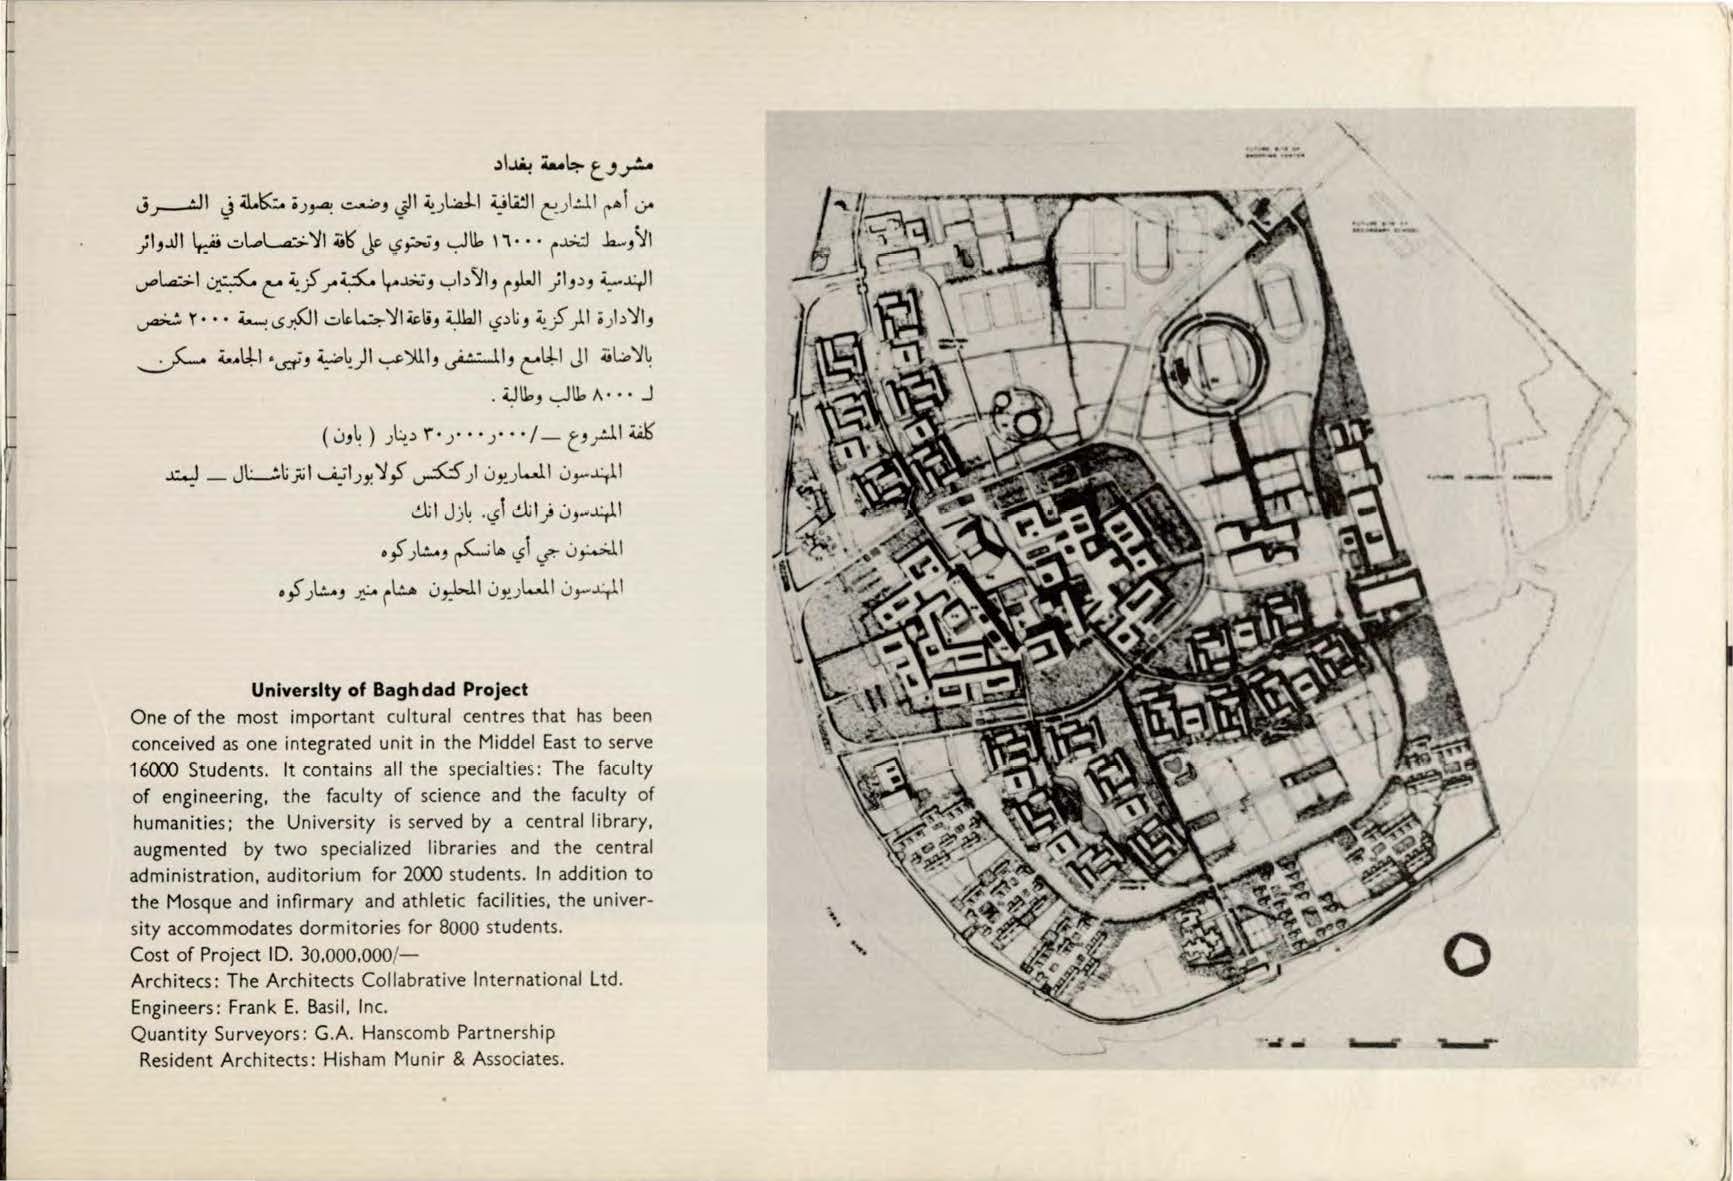 Jami'a Baghdad - The University of Baghdad chapter from the&nbsp;Hisham Munir &amp; Assoc. project portfolio is a four page project brief including  photographs or architectural models, sketches, and a brief desccription of the design for the University of Baghdad. Text is written in both Arabic and English.